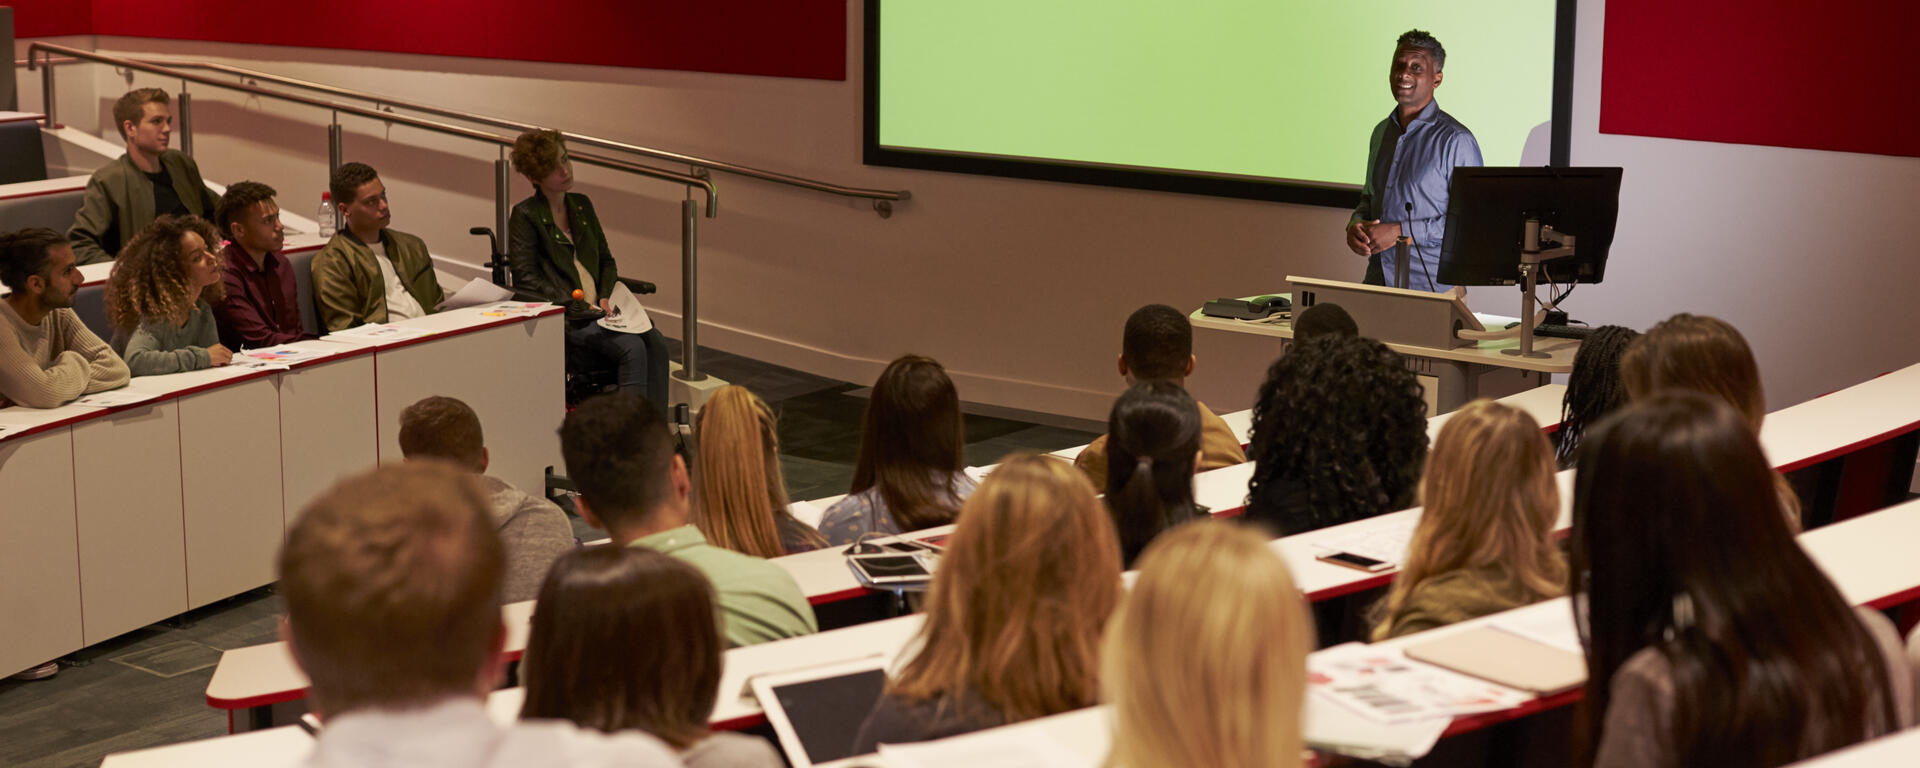 classroom with students watching and listening to a professor speak in front of large screen 